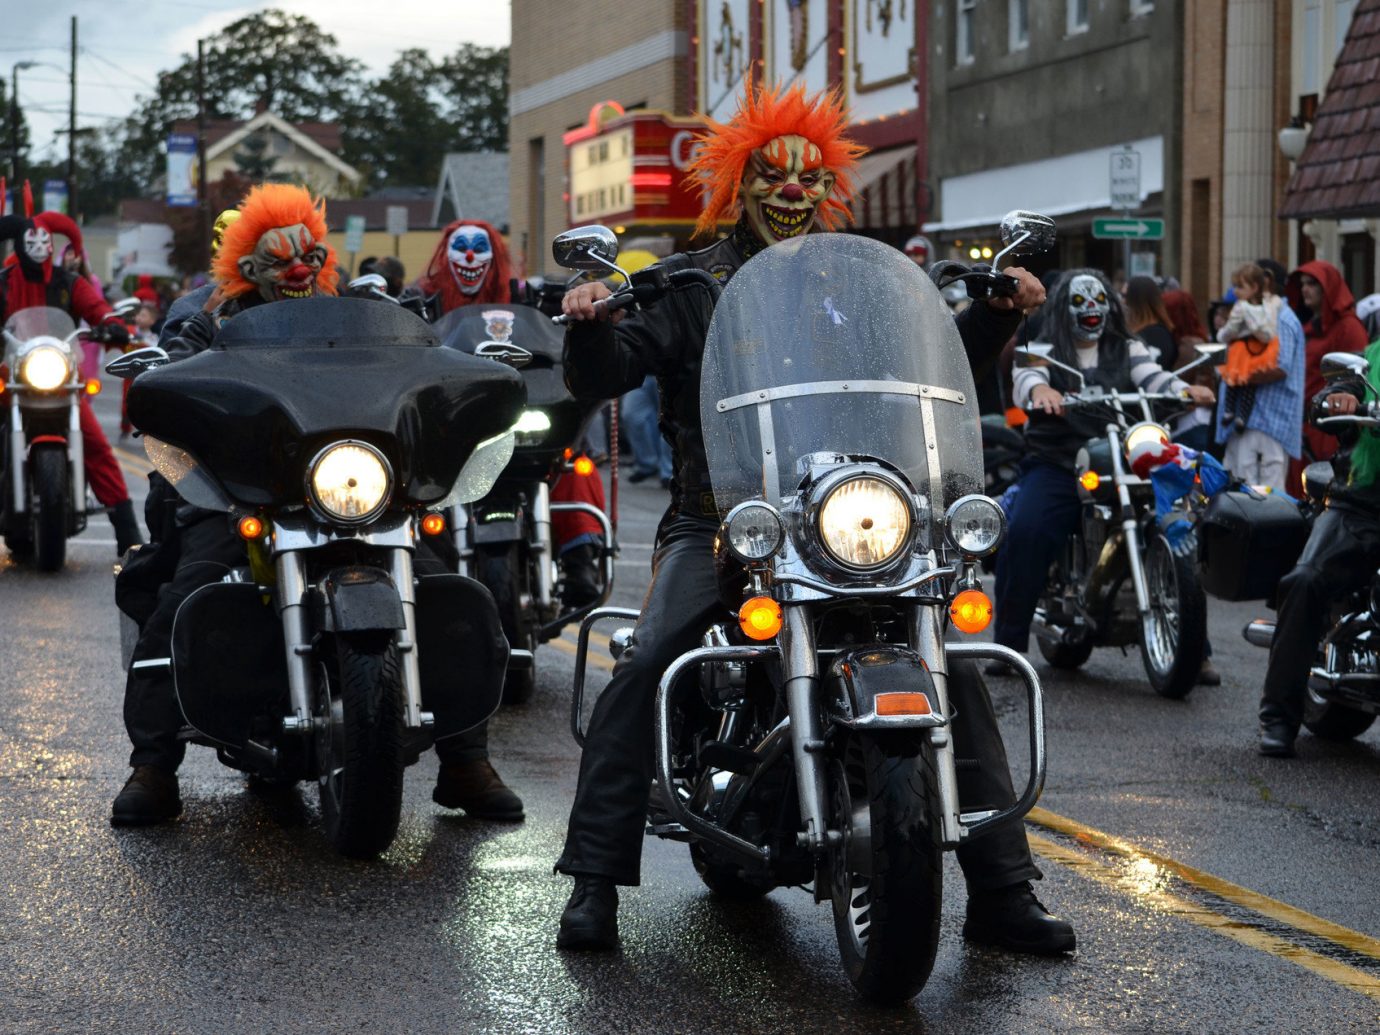 costume festival festive fun halloween holiday motorcycle parade people road streets Trip Ideas outdoor car motorcycling vehicle police demonstration